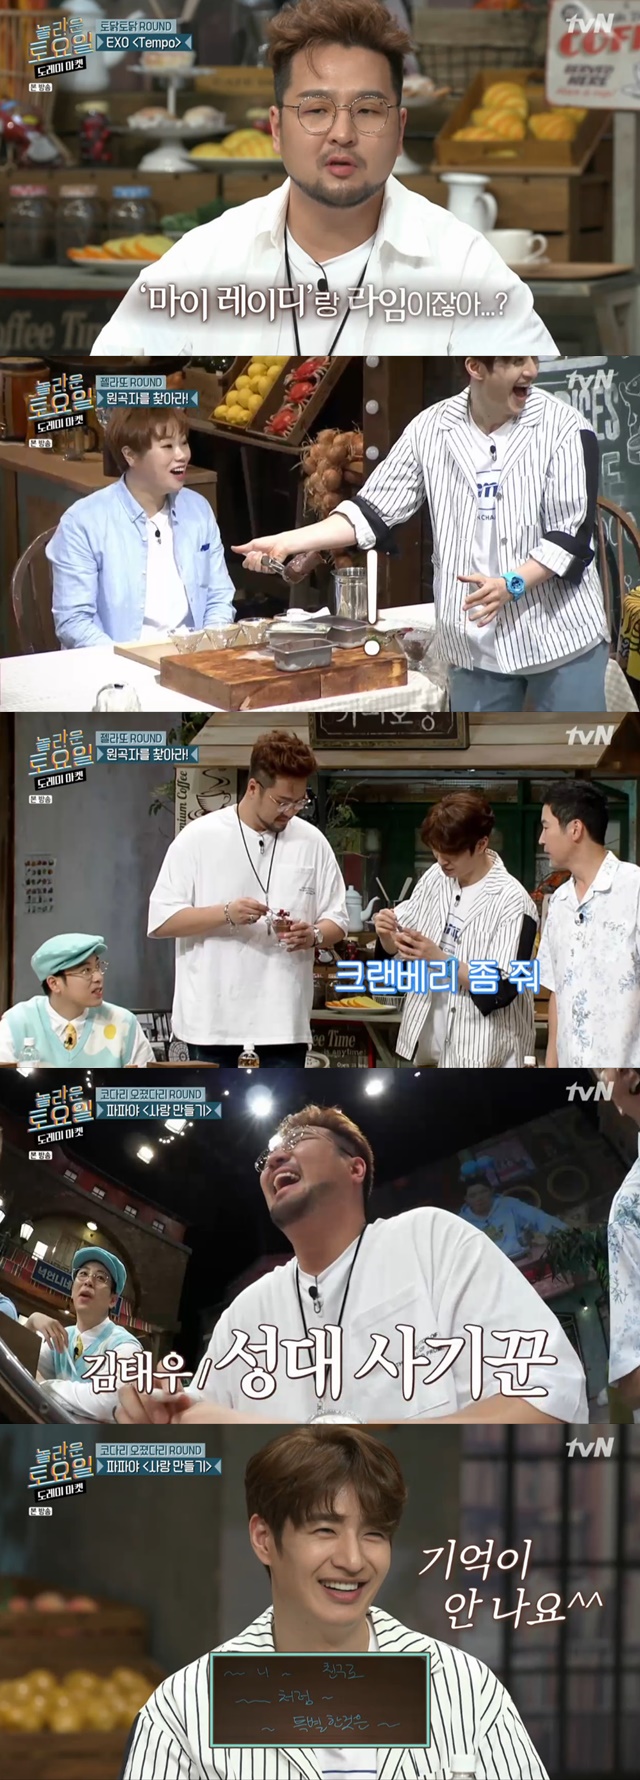 Kim Tae Woo, Son Hoyoung took over Amazing Saturday with a quick look.On TVN Amazing Saturday - DoReMi Market (hereinafter referred to as Amazing Saturday), which was broadcast on August 24, group god (Giody) members Kim Tae Woo and Son Hoyoung boasted their high-quality support skills with their 20-year broadcasting career.The two appeared as an aid idol, and then Son Hoyoung said, Recently, Kim Tae Woo and a unit group called Hoo are in the group.I will probably be performing a concert on the broadcast day. Son Hoyoung said, I usually see Amazing Saturday.I like songs and food, so I like Park Na-rae Food Institute. Kim Tae Woo said, I monitored after the appearance was confirmed. I thought Nucksal would fit well because he was a rapper, but he was not very good.Kim Tae Woo said, My support is not good, I thought it would fit well before I saw it, but it was all wrong.But Kim Tae Woo laughed, I can do well if my favorite singer EXO comes out.Curiously, the first support was Kim Tae Woos favorite EXO Tempo.Kim Tae Woo did not get the first correct answer, but he threw a big hint at the members and eventually ate food.The two continued to play in snack quizzes, as Son Hoyoung won a chocolate gelato by shouting Finding the Original in the quiz, To Your Side.In particular, Son Hoyoung laughed with his full power, sweeping chocolate gelato.Kim Tae Woo also took all of the toppings with Joo Young-hoons Our Love is As It is and bartered with Son Hoyoung.Kim Tae Woo said, This program seems to be good.Food and problem harmony is great, Son Hoyoung praised, Do not pretend to see it all the time, he said.In the second round, Papaya Making Love was presented.Kim Tae Woo said, I do not know this song well, but he showed a vocal crook by singing a soulful song Making love.han jung-won